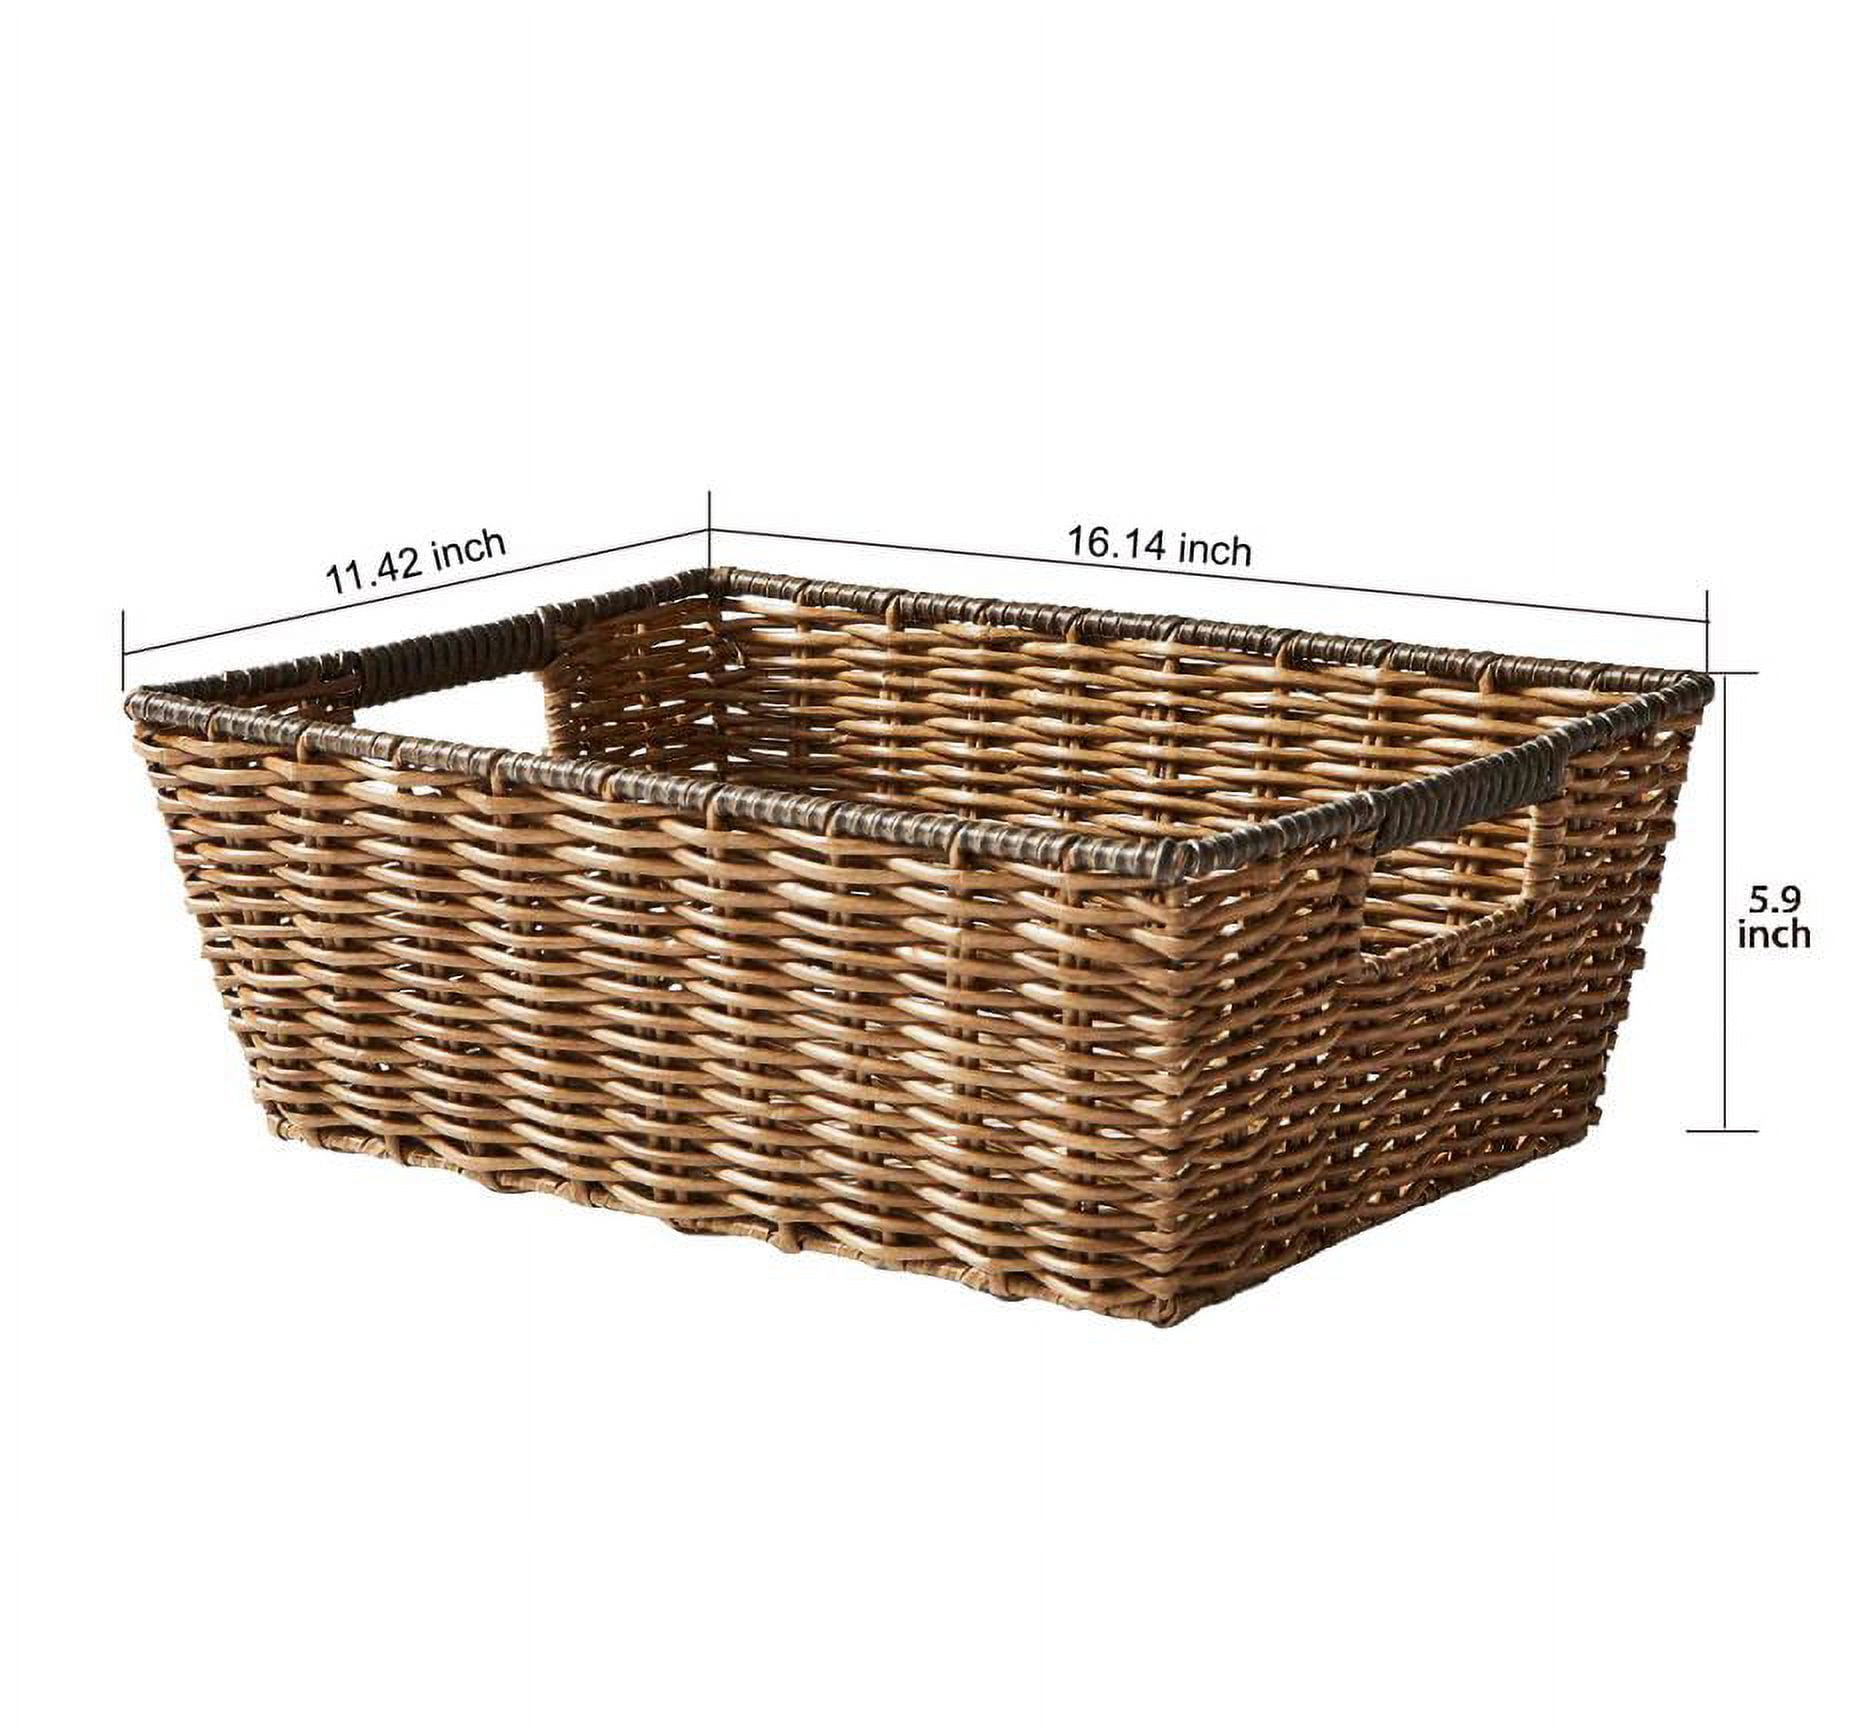 Tablecraft HM1175A Ridal Collection Handwoven Polycord Basket Round, Assorted Pack Includes: 1 Each BL, GN, R, Y, x